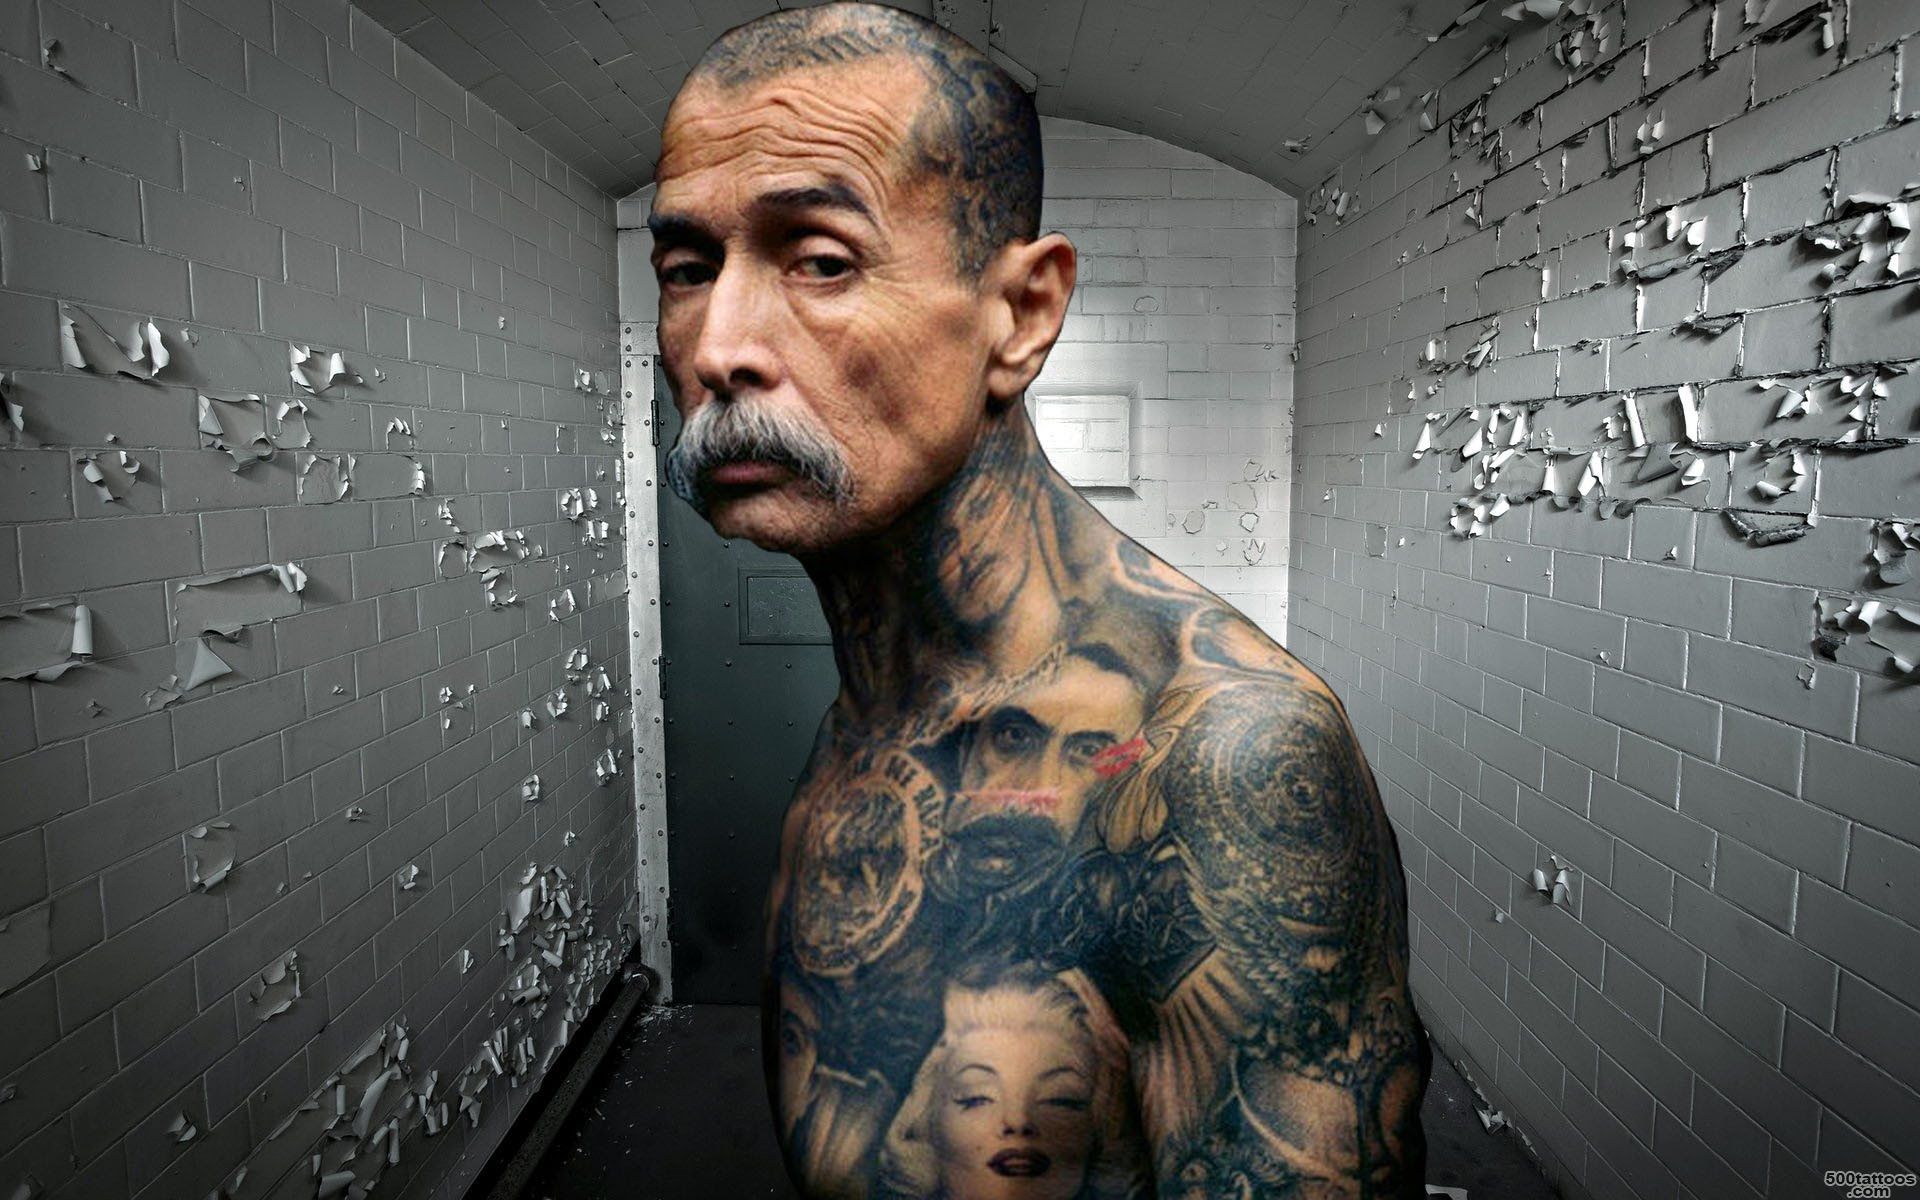 Prison and gang tattoos   YouTube_41